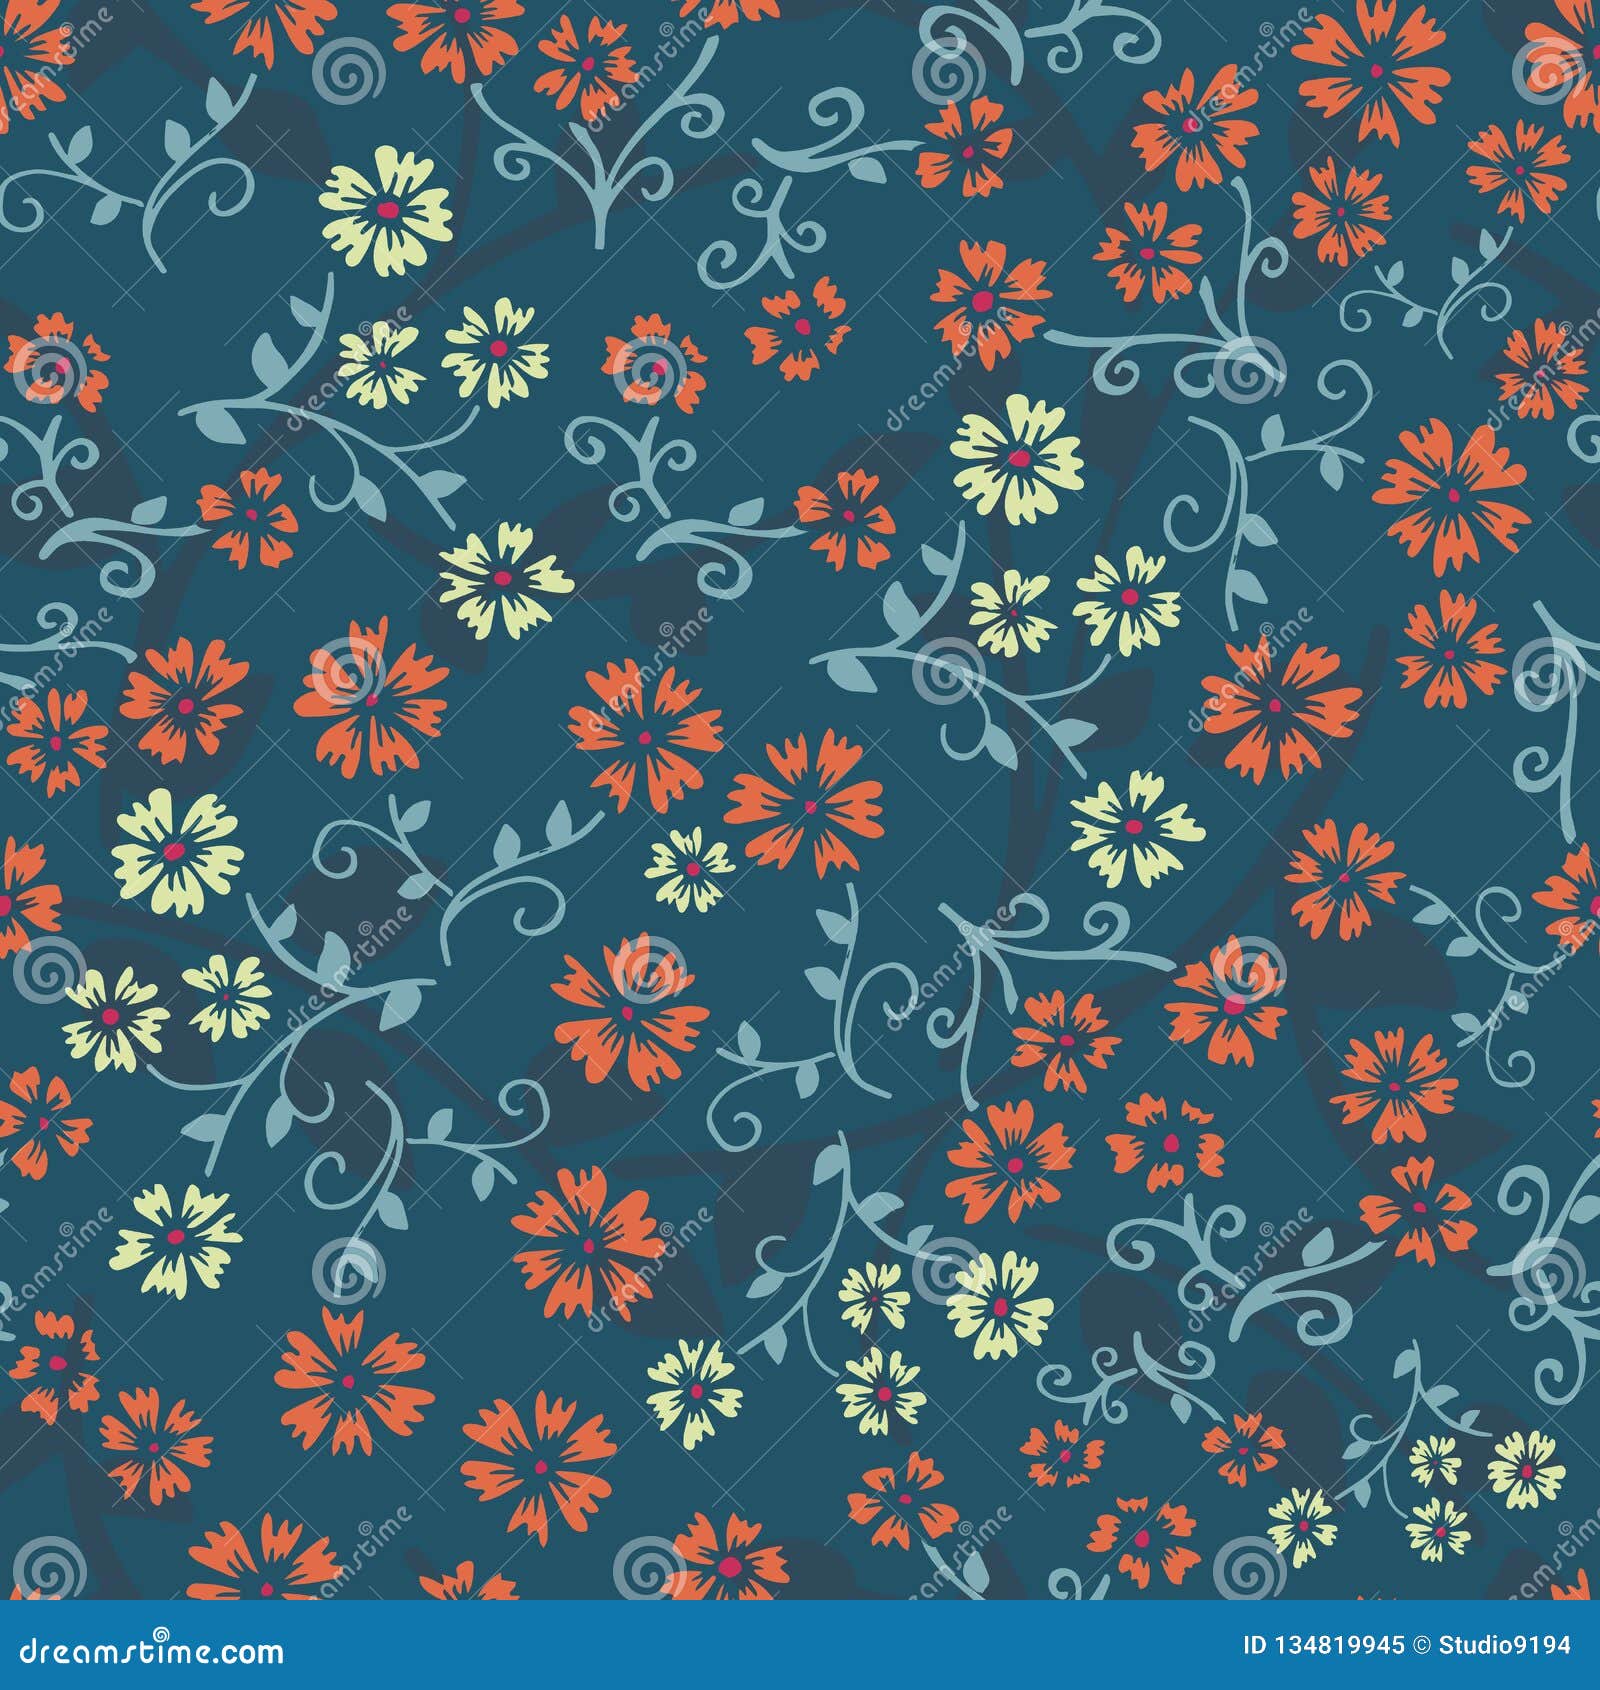 Seamless Vector Repeating Floral Pattern. Orange and Yellow ...